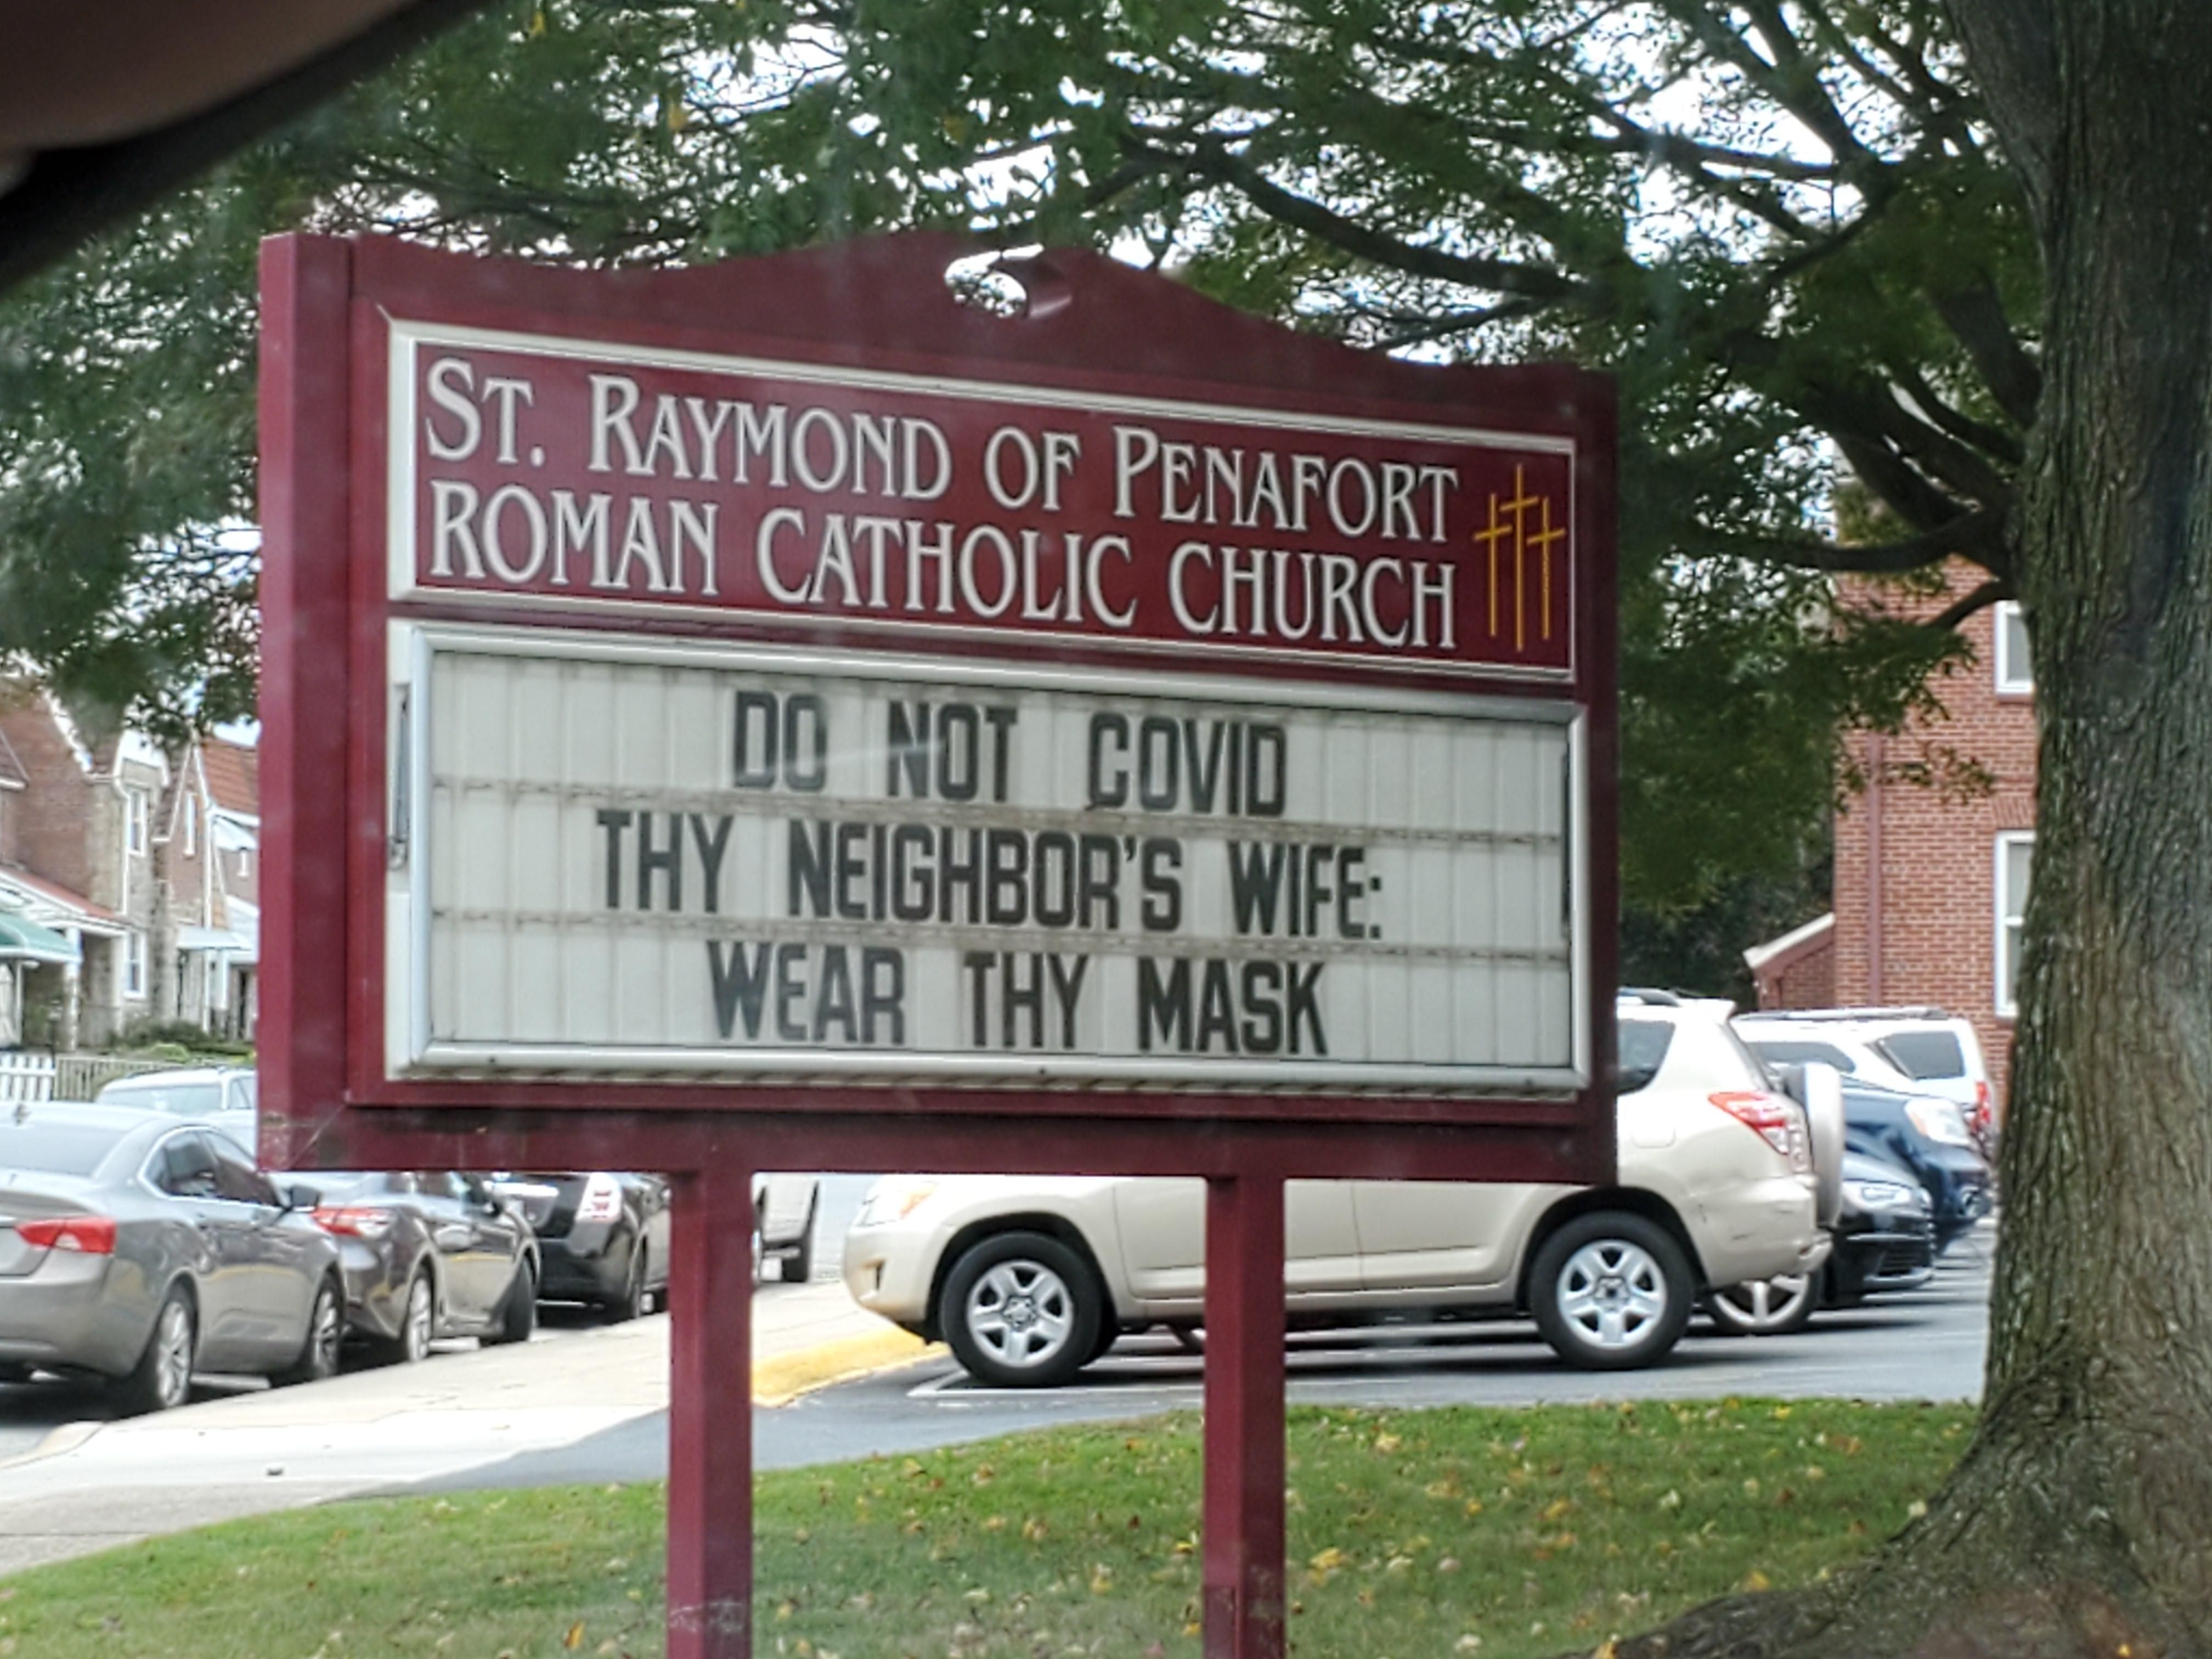 Philly Catholics having a sense of humor! Seriously though, wear a goddamn mask...